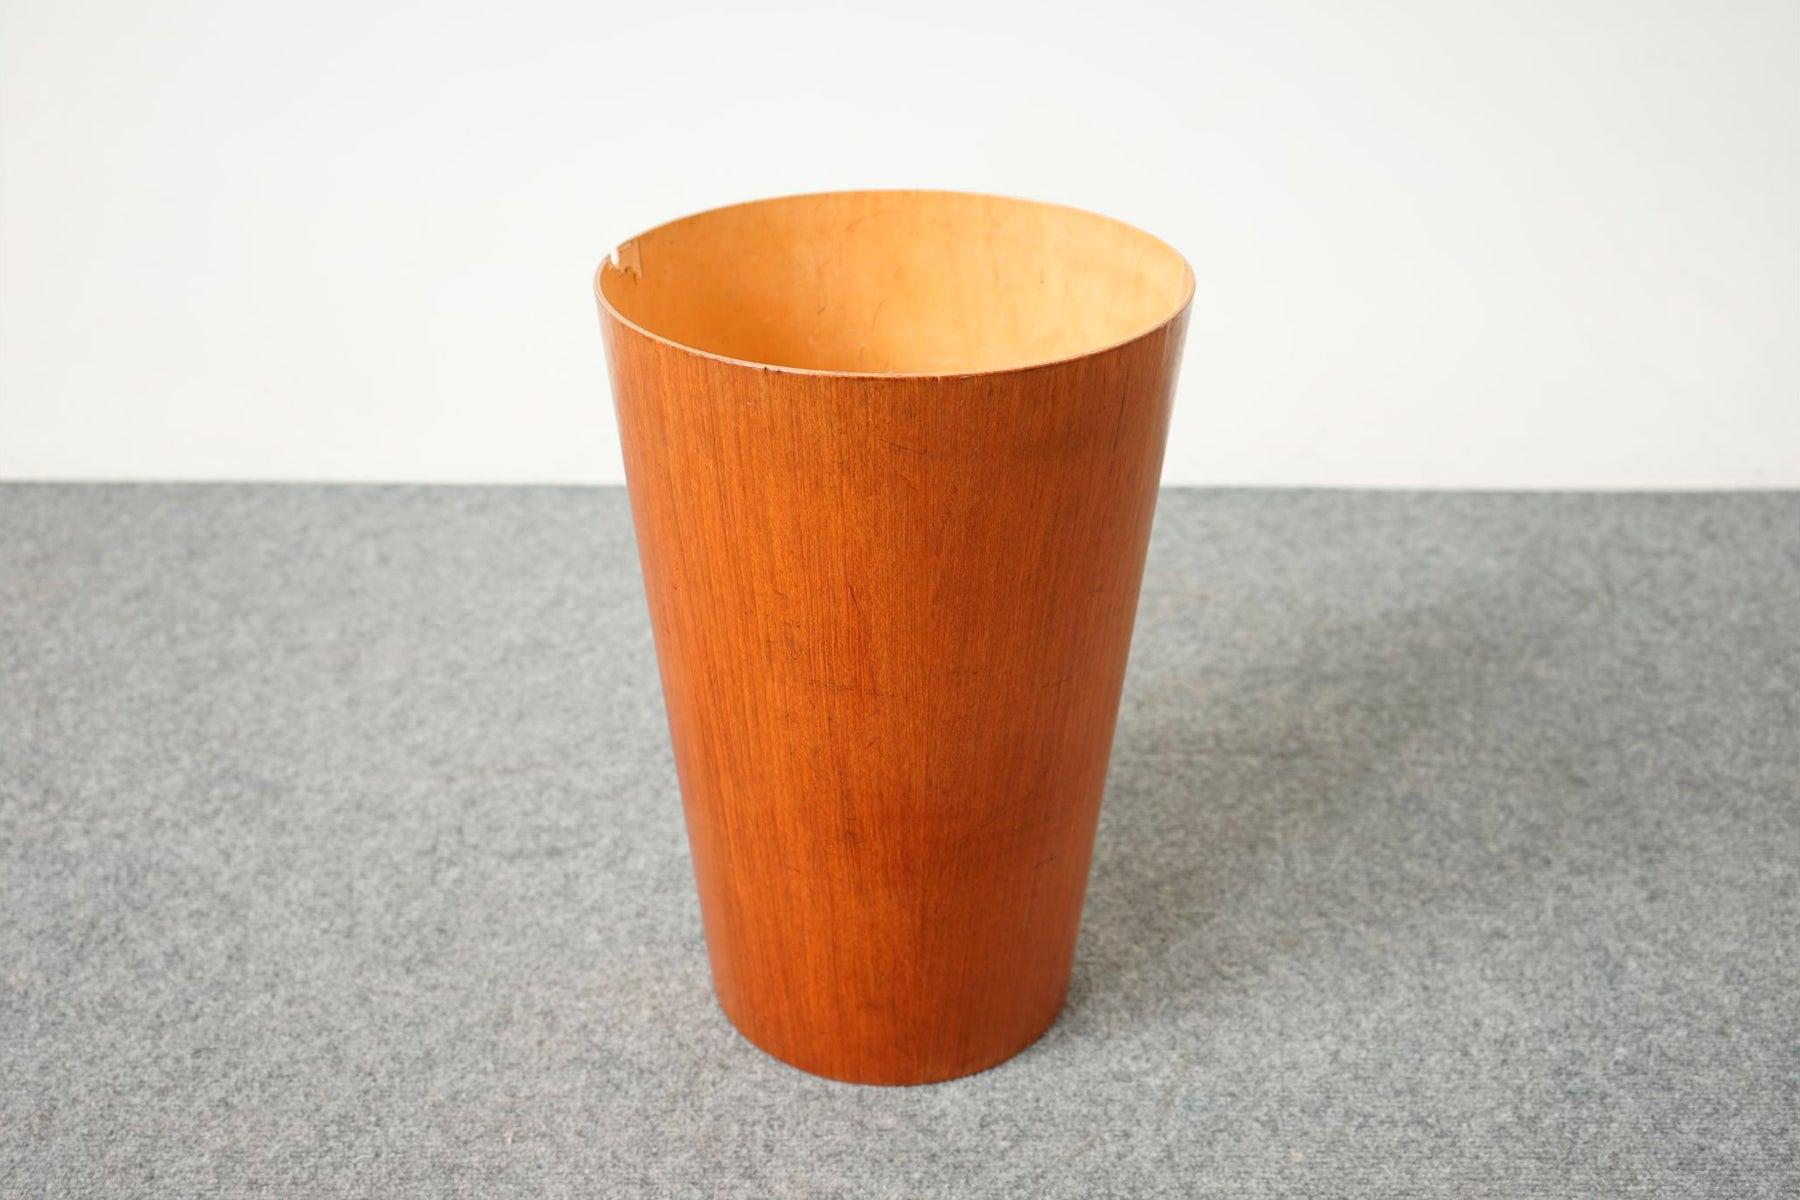 Teak mid-century waste bin by Martin Aberg for Servex circa 1960's. This highly collectible waste bin features an elegantly tapered cylindrical shape and teak veneer construction. Shows makers mark on underside of base.

Unrestored condition,